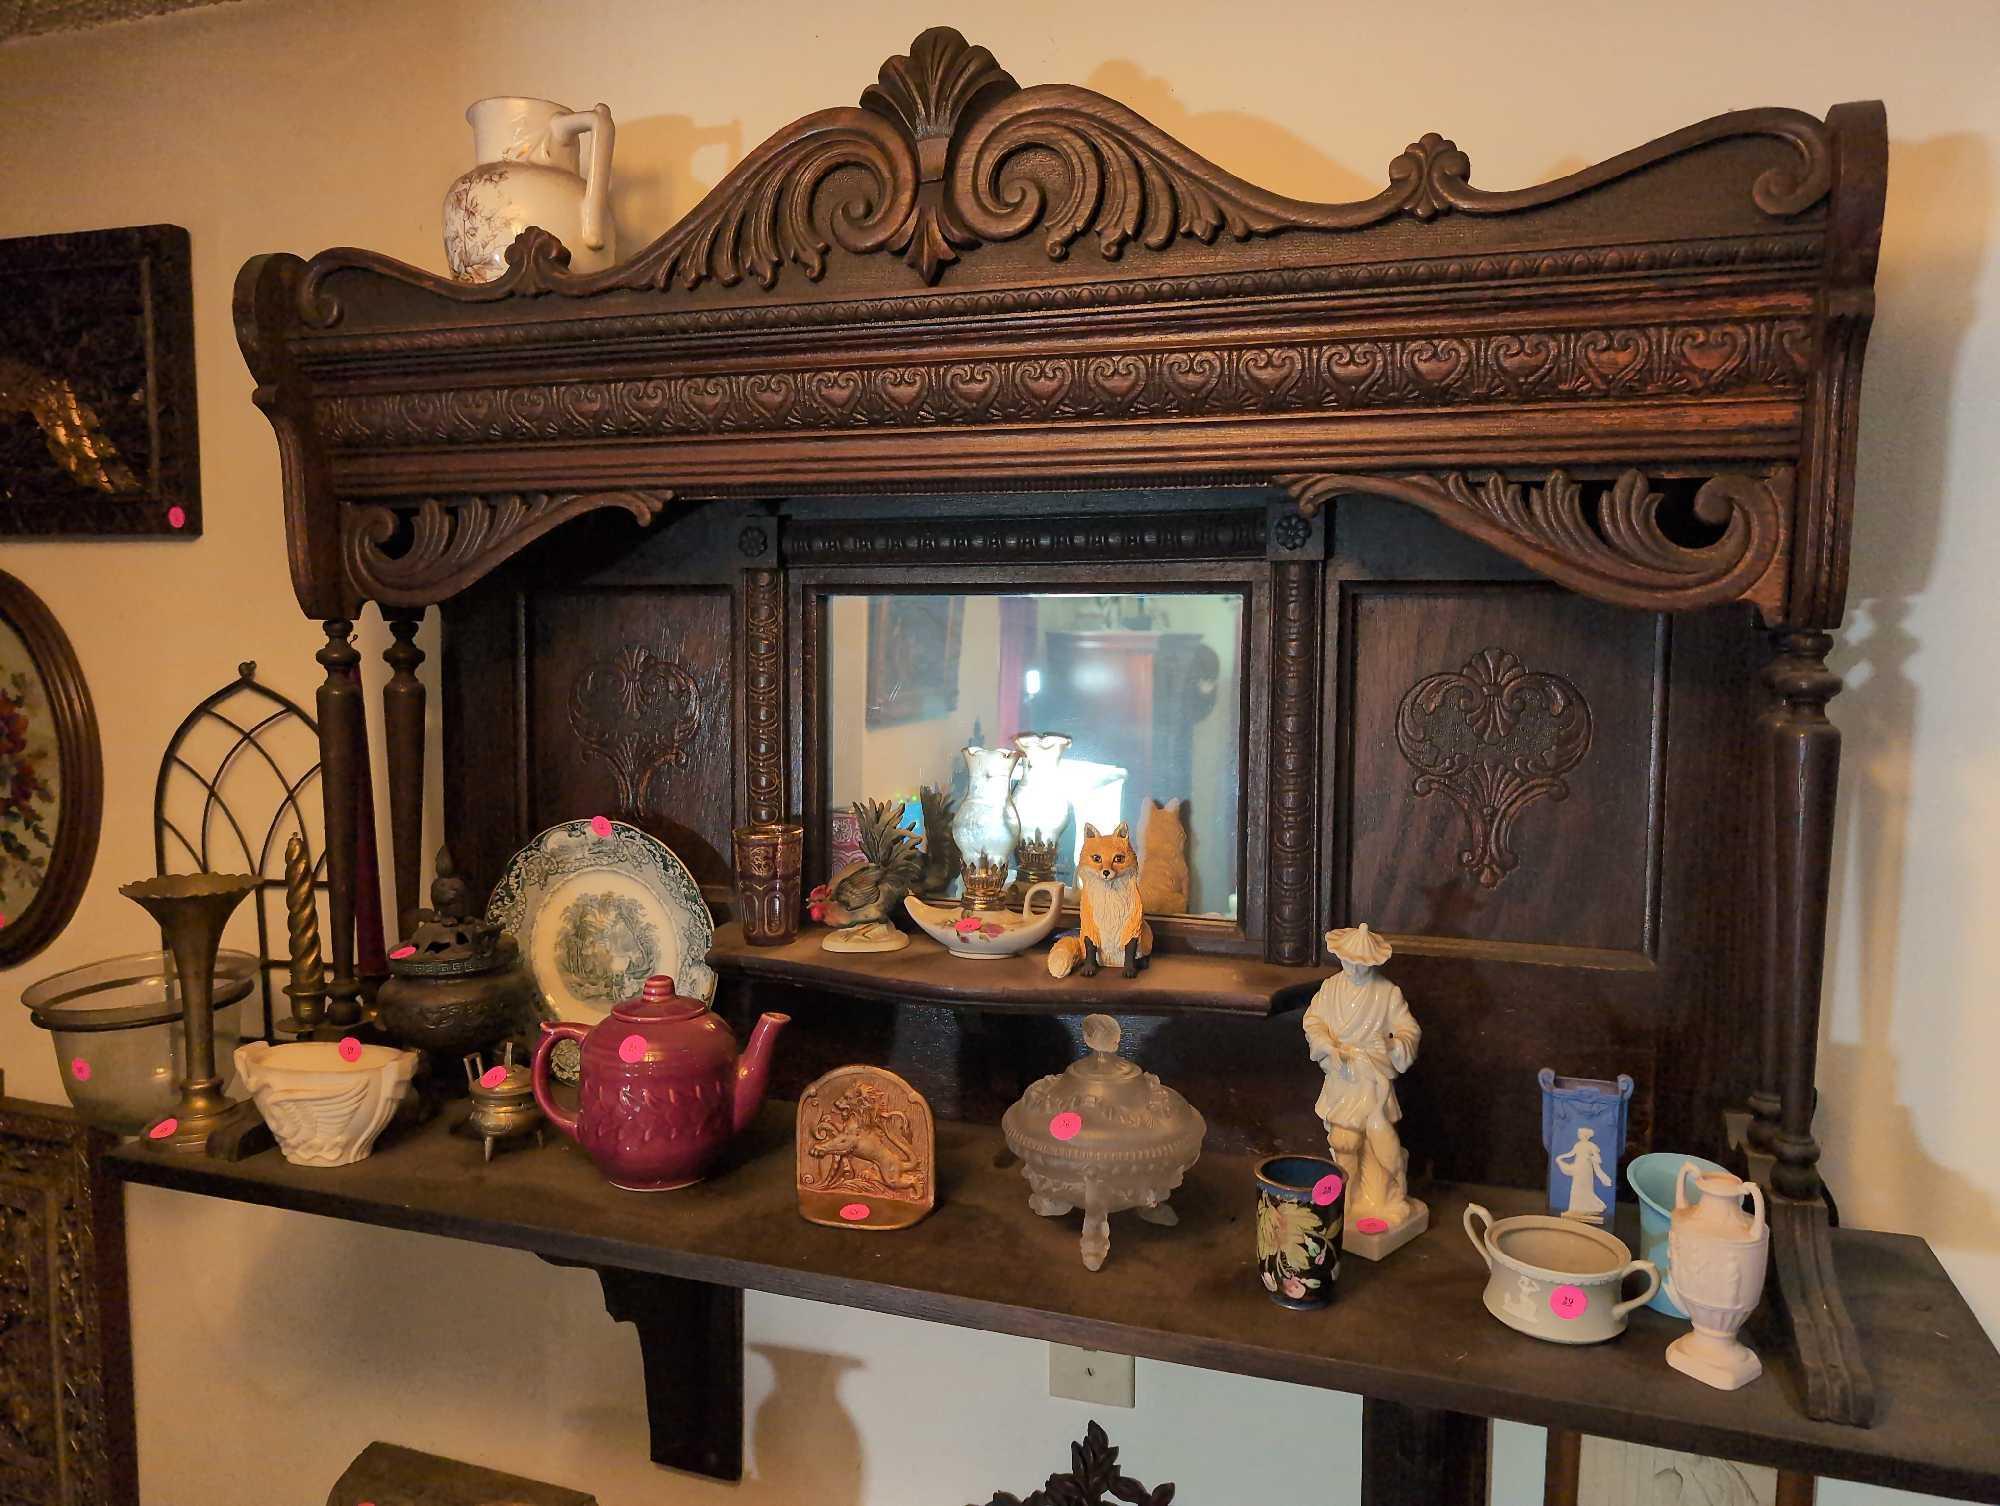 (FOYER) LATE 19TH CENTURY VICTORIAN EASTLAKE DARK STAINED OAK WALL SHELF MIRROR. VERY NICE CARVED